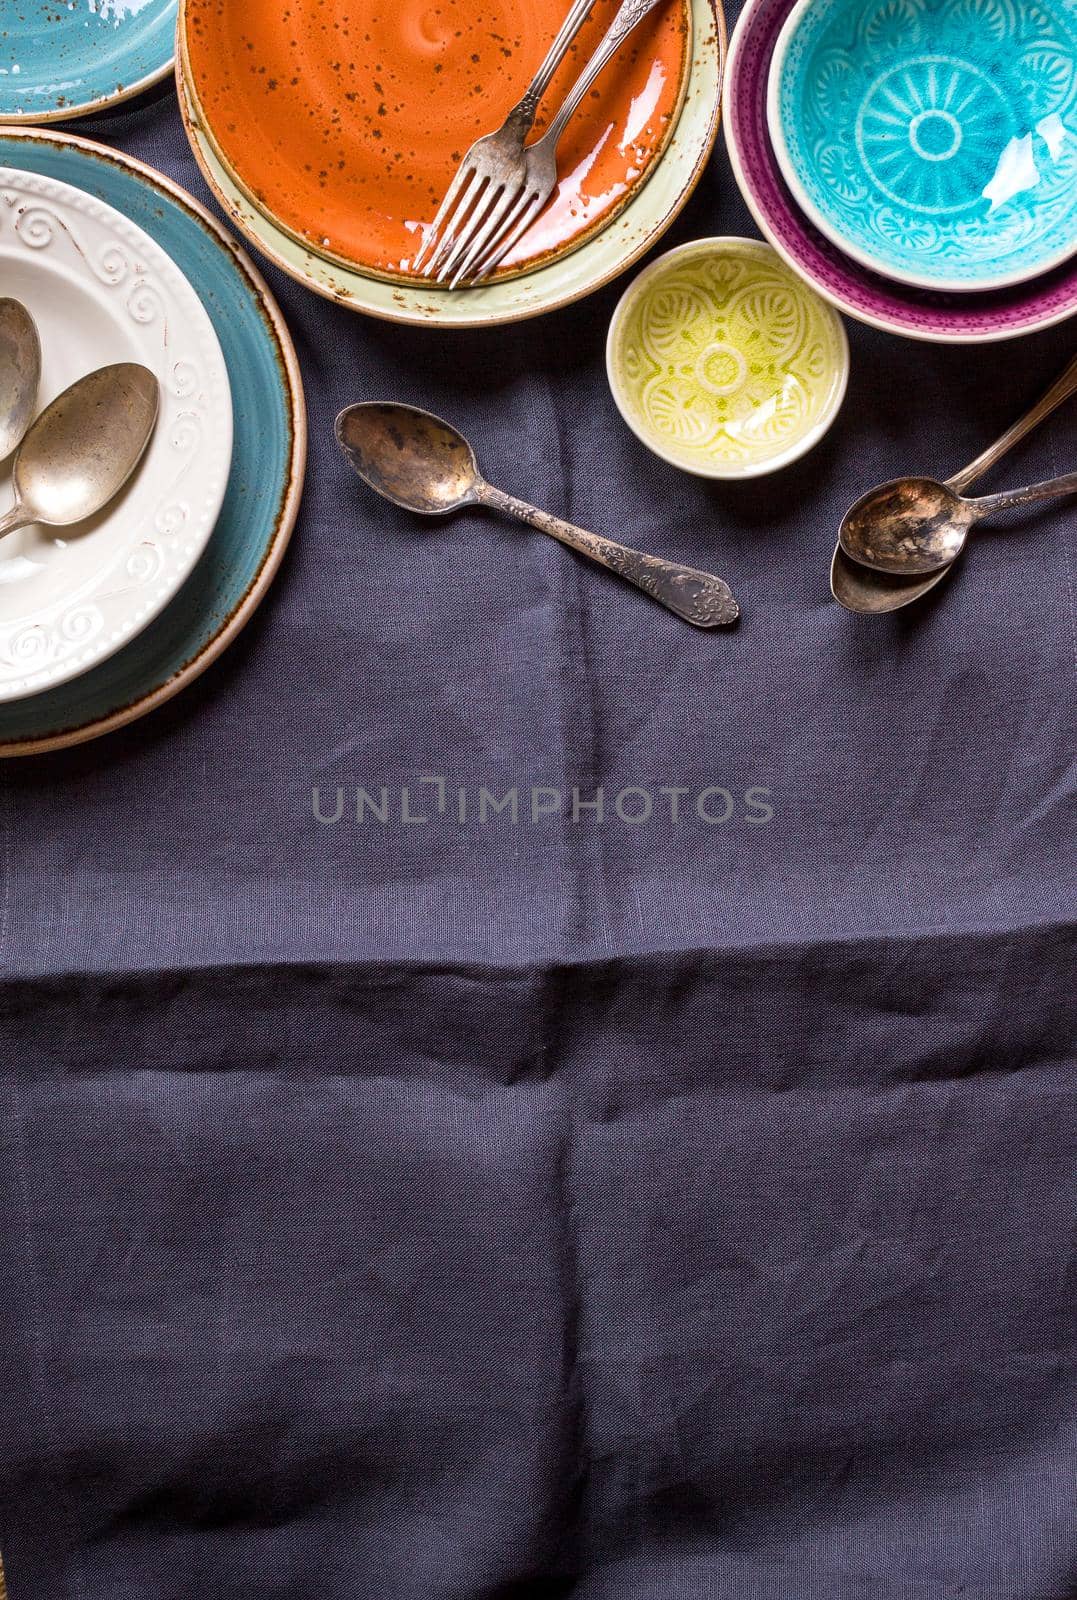 Vintage multicolored empty plates and bowls on a gray linen tablecloth. With antique spoons and forks. Space for text. Table setting. Shabby chic/retro style. Top view. Rustic kitchen. Copy space